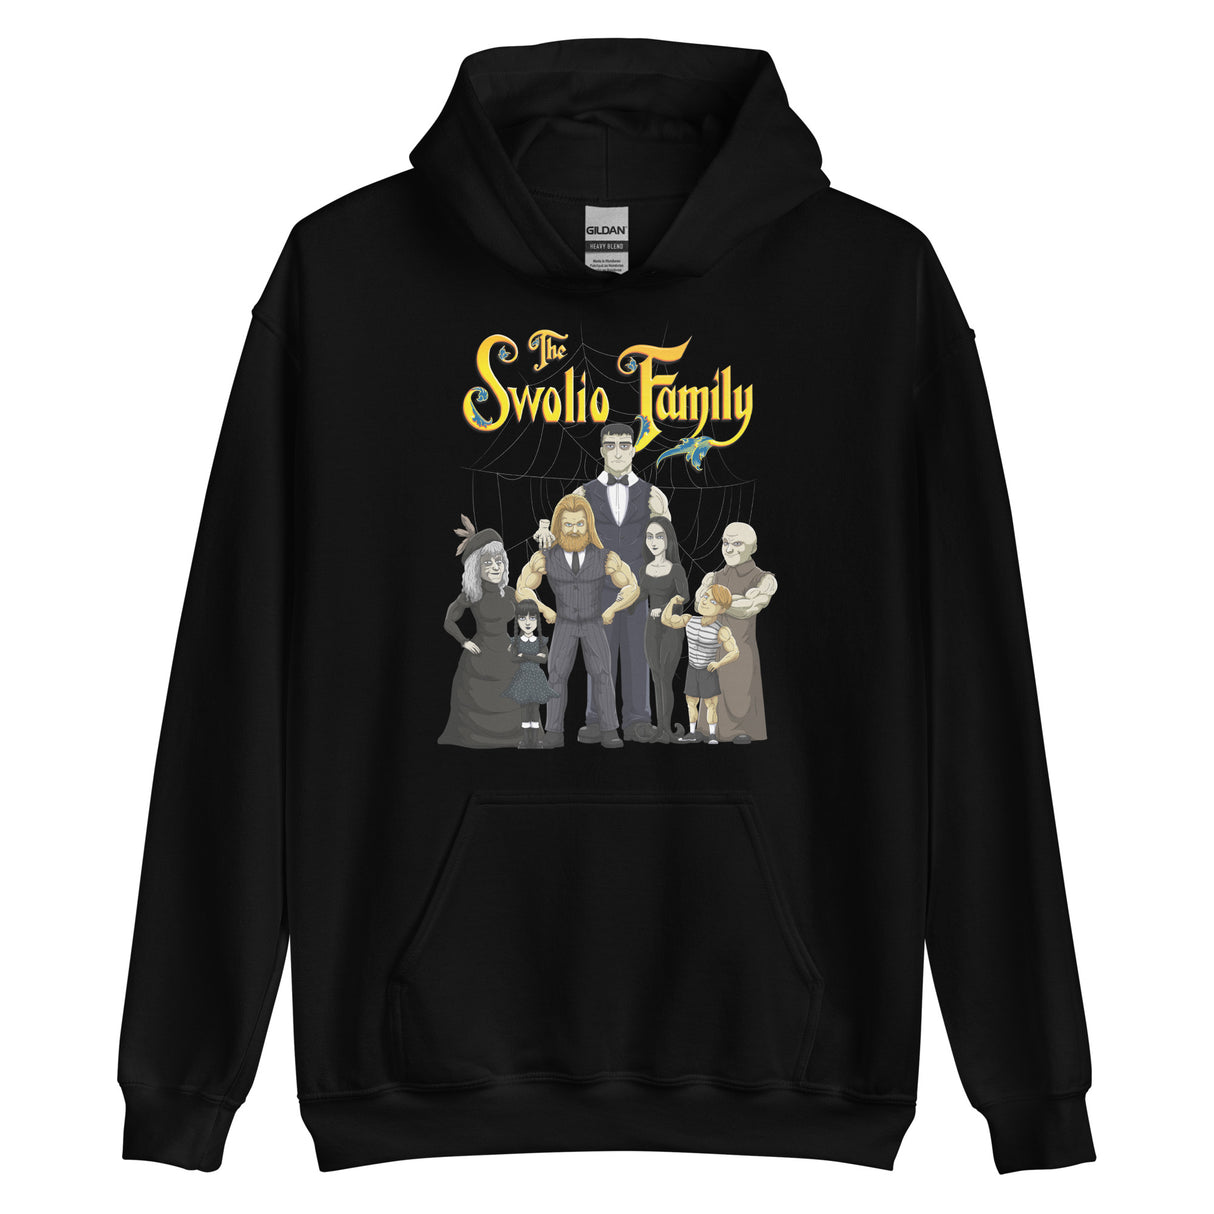 The Swolio Family Hoodie